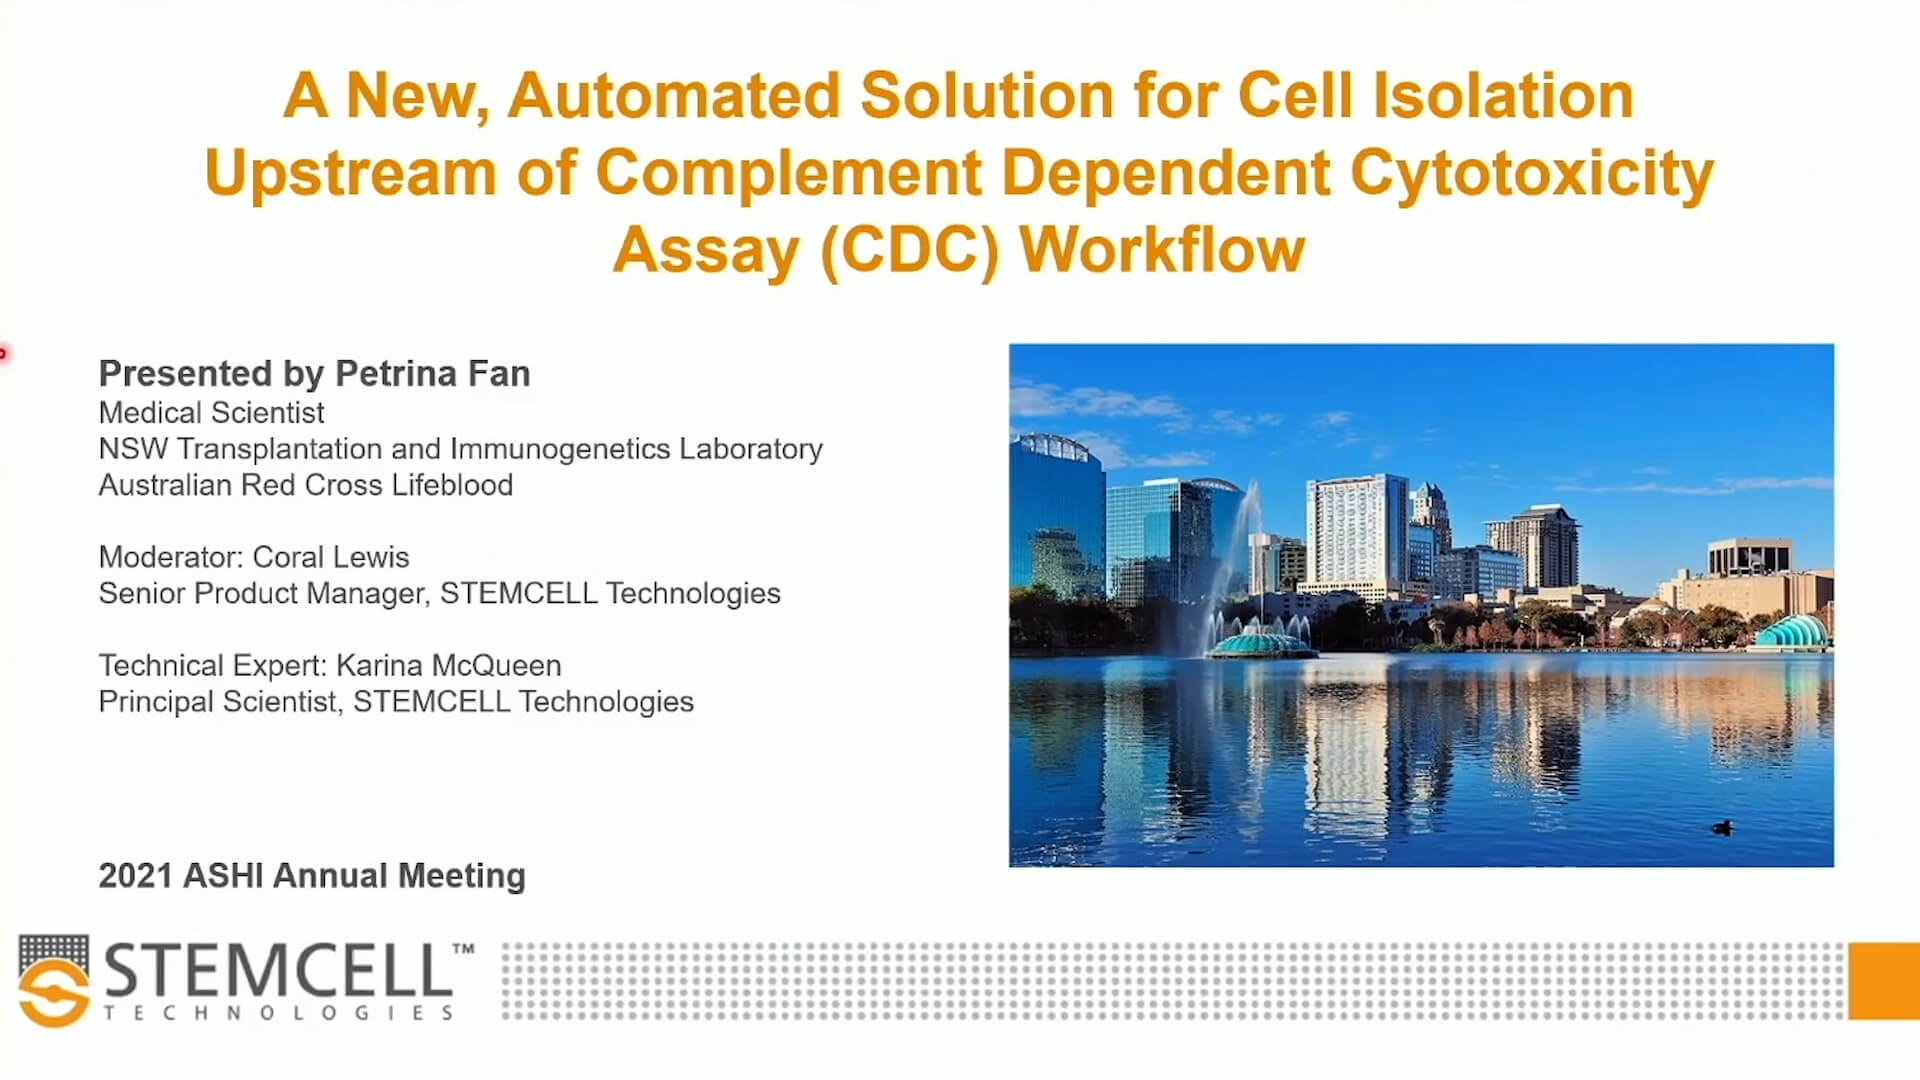 A New, Automated Solution for Cell Isolation Upstream of Complement-Dependent Cytotoxicity Assay (CDC) Workflow